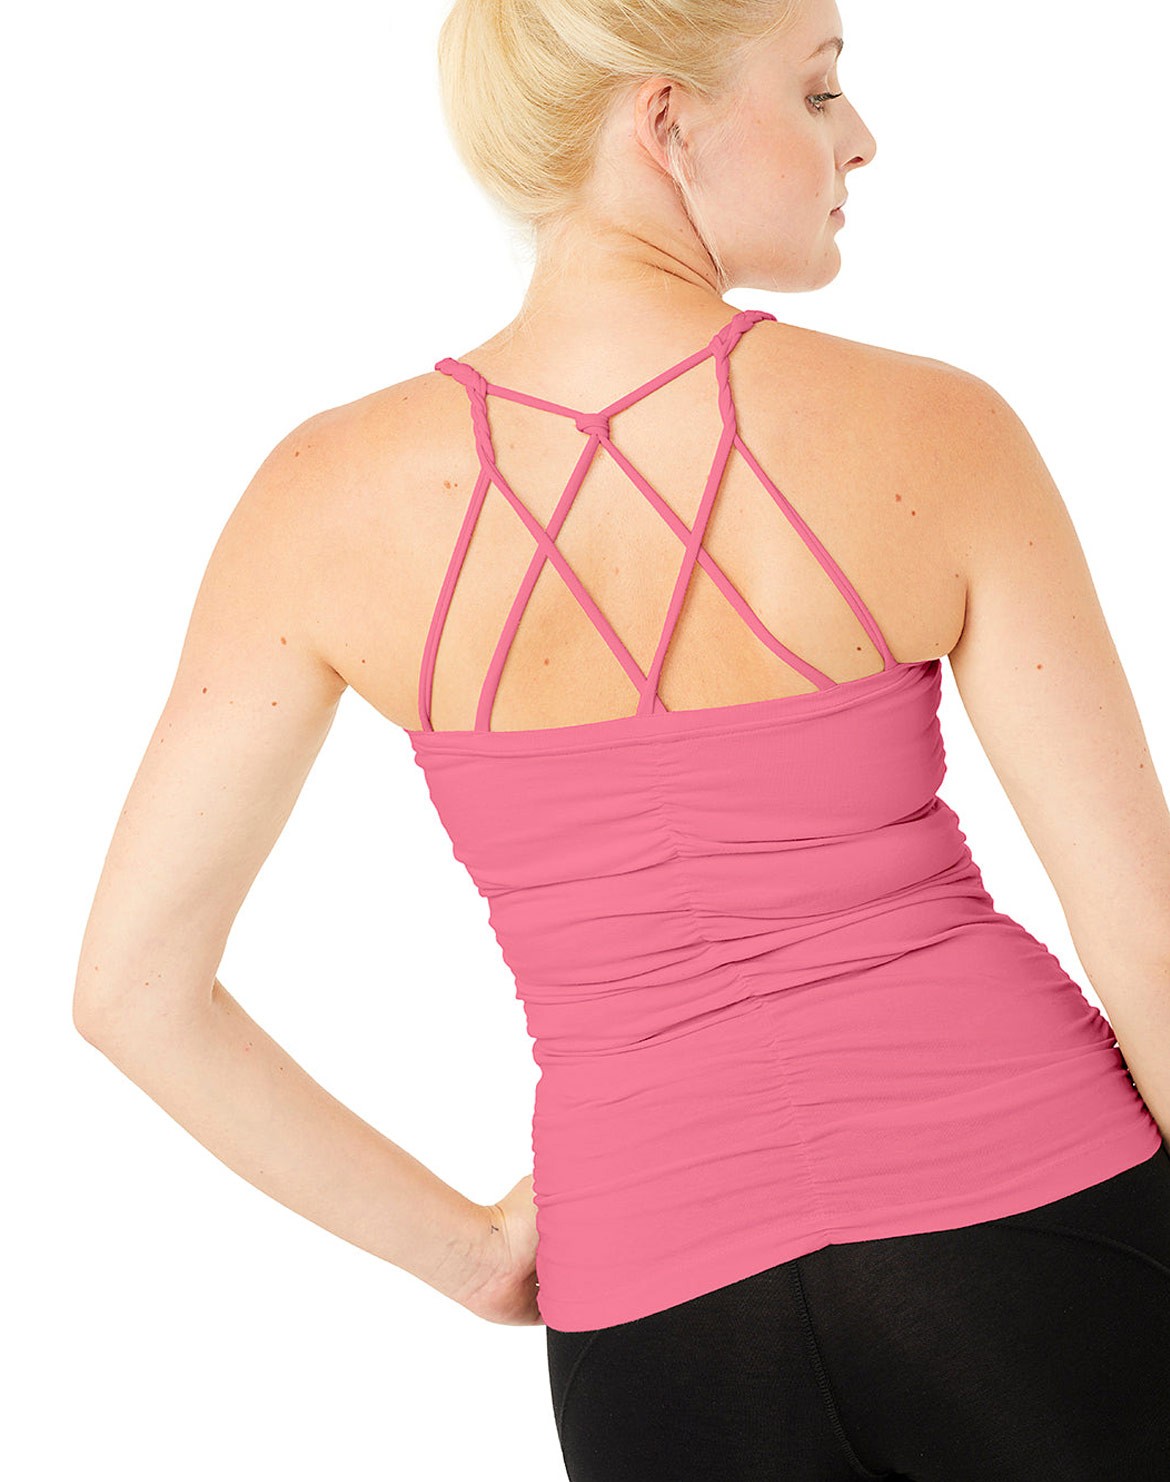 Cable Yoga Top